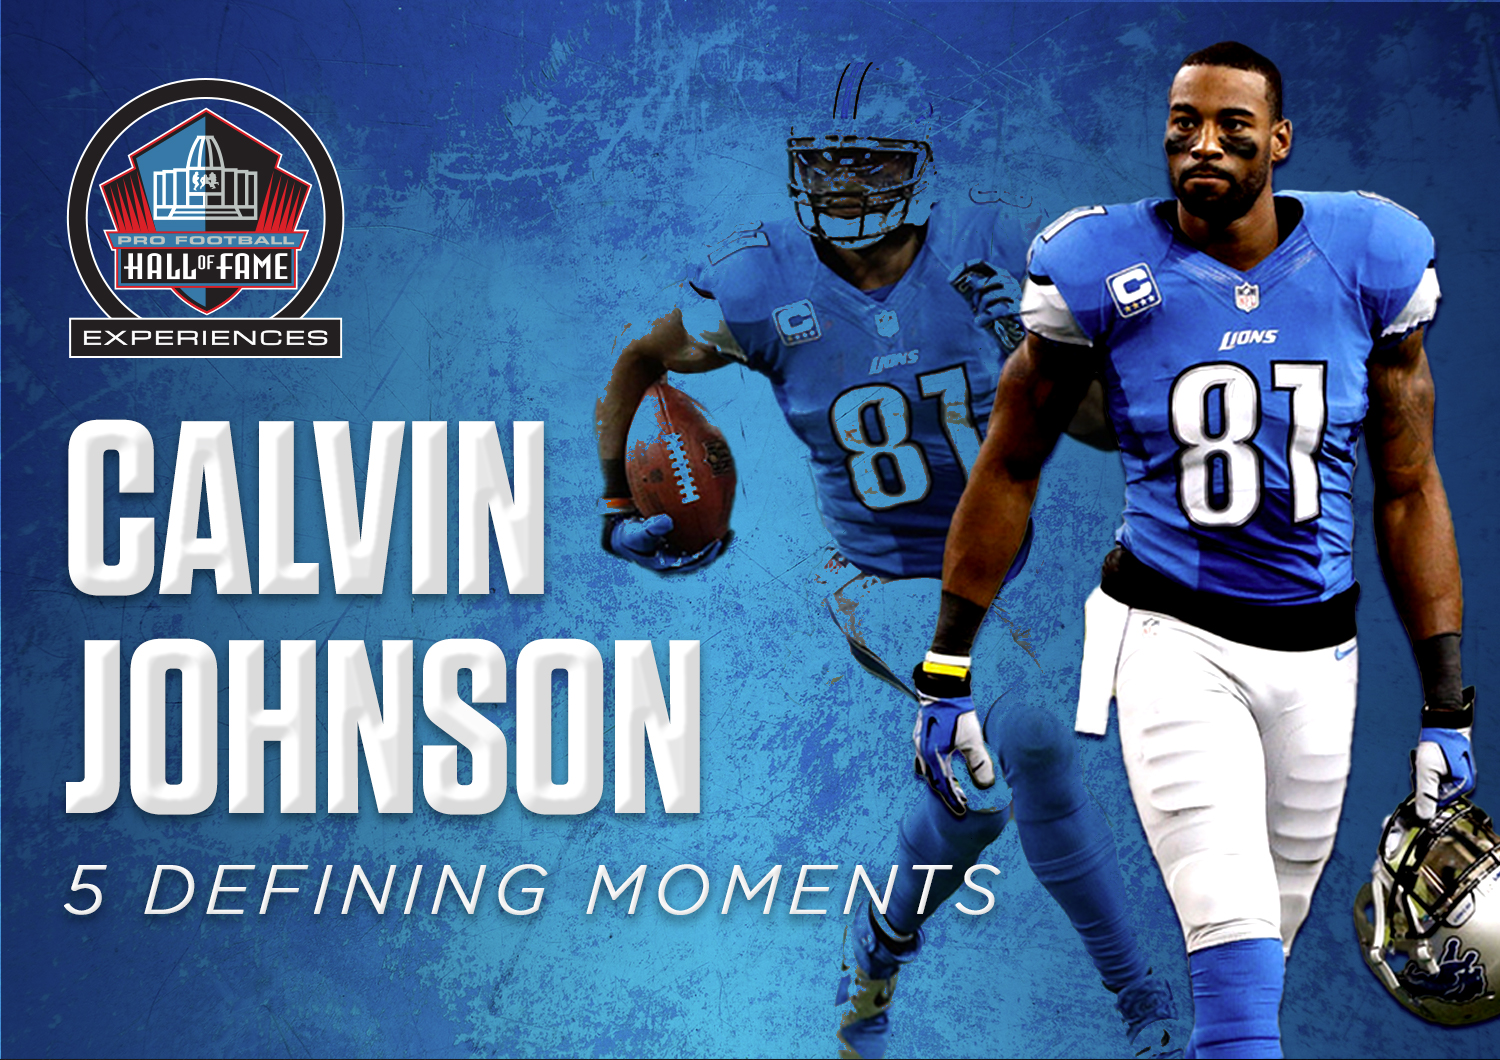 5 Moments that Defined Calvin Johnson's Hall of Fame Career